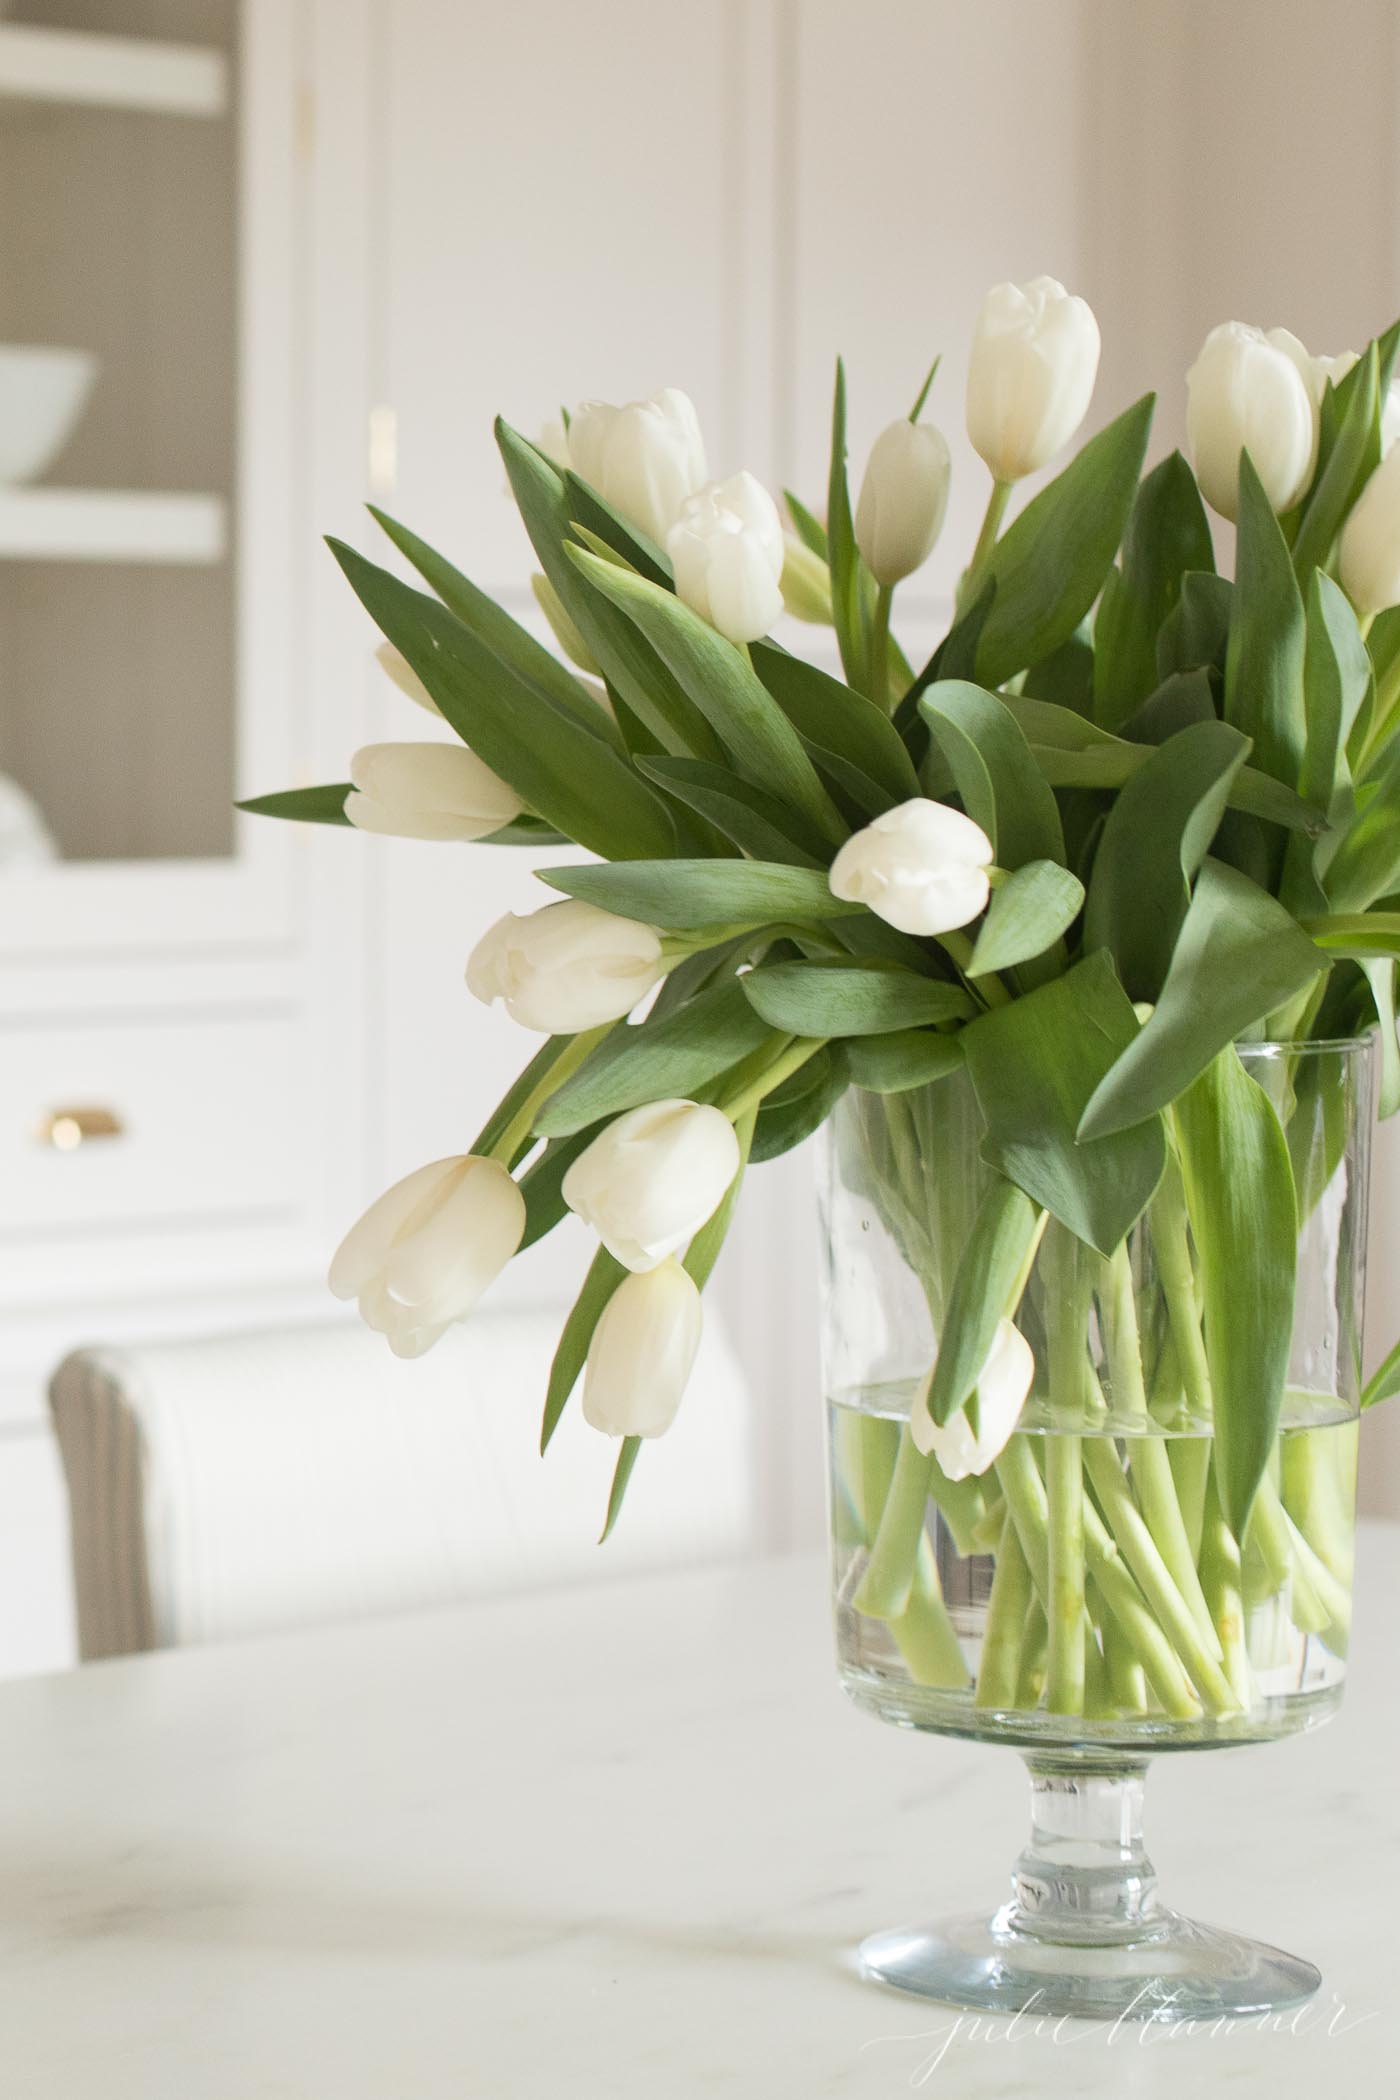 How to Arrange Tulips, A Step by Step Tutorial to Create Your Own ...